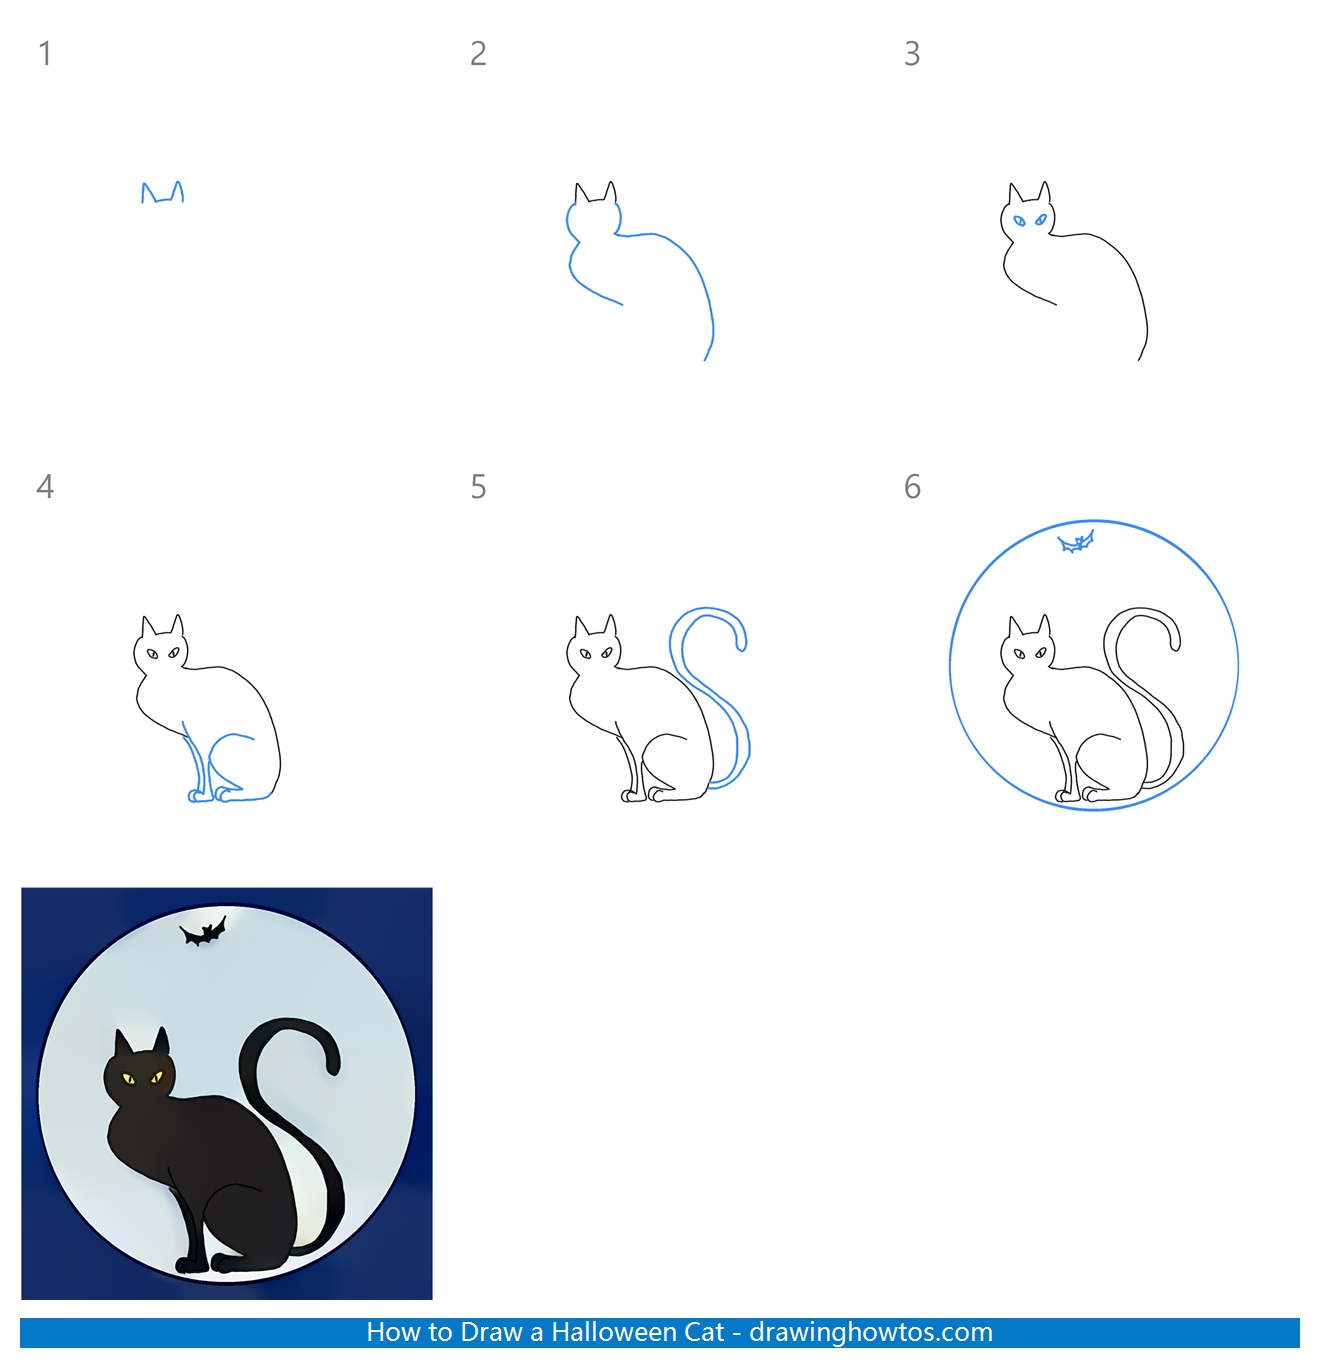 How to Draw a Halloween Black Cat Step by Step